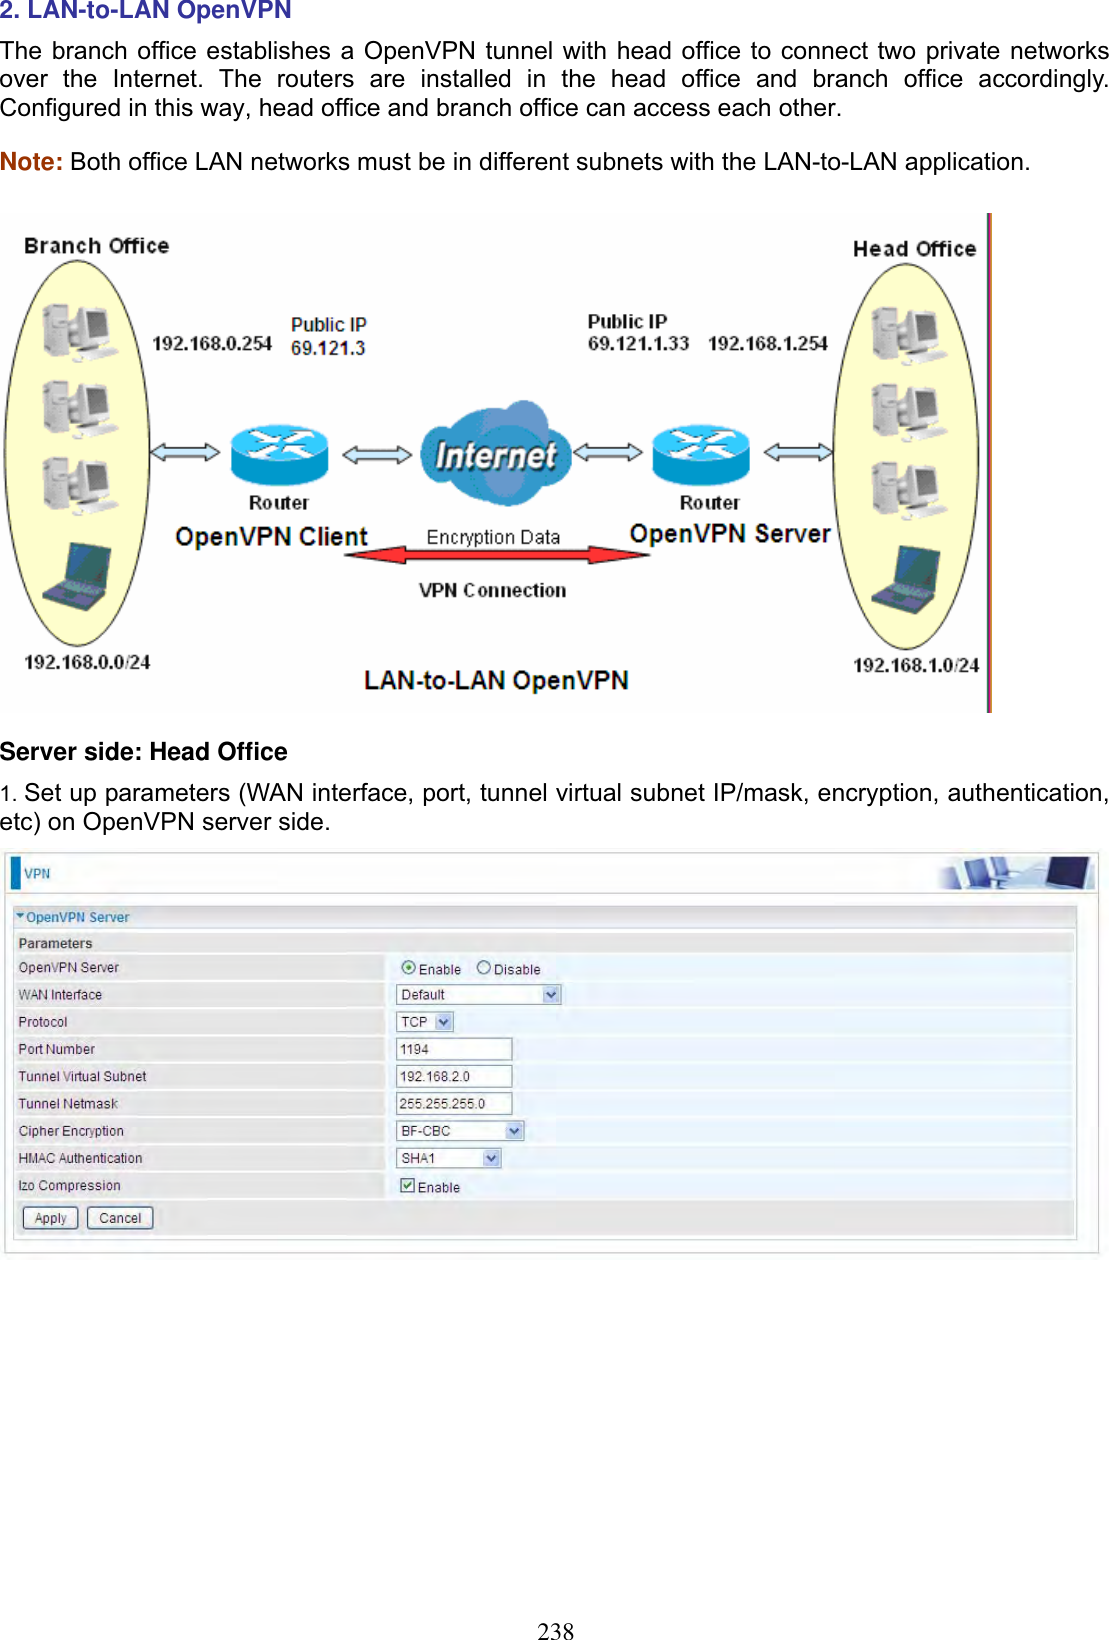 2382. LAN-to-LAN OpenVPN  The branch office establishes a OpenVPN tunnel with head office to connect two private networks over the Internet. The routers are installed in the head office and branch office accordingly. Configured in this way, head office and branch office can access each other.Note: Both office LAN networks must be in different subnets with the LAN-to-LAN application. Server side: Head Office 1. Set up parameters (WAN interface, port, tunnel virtual subnet IP/mask, encryption, authentication, etc) on OpenVPN server side. 